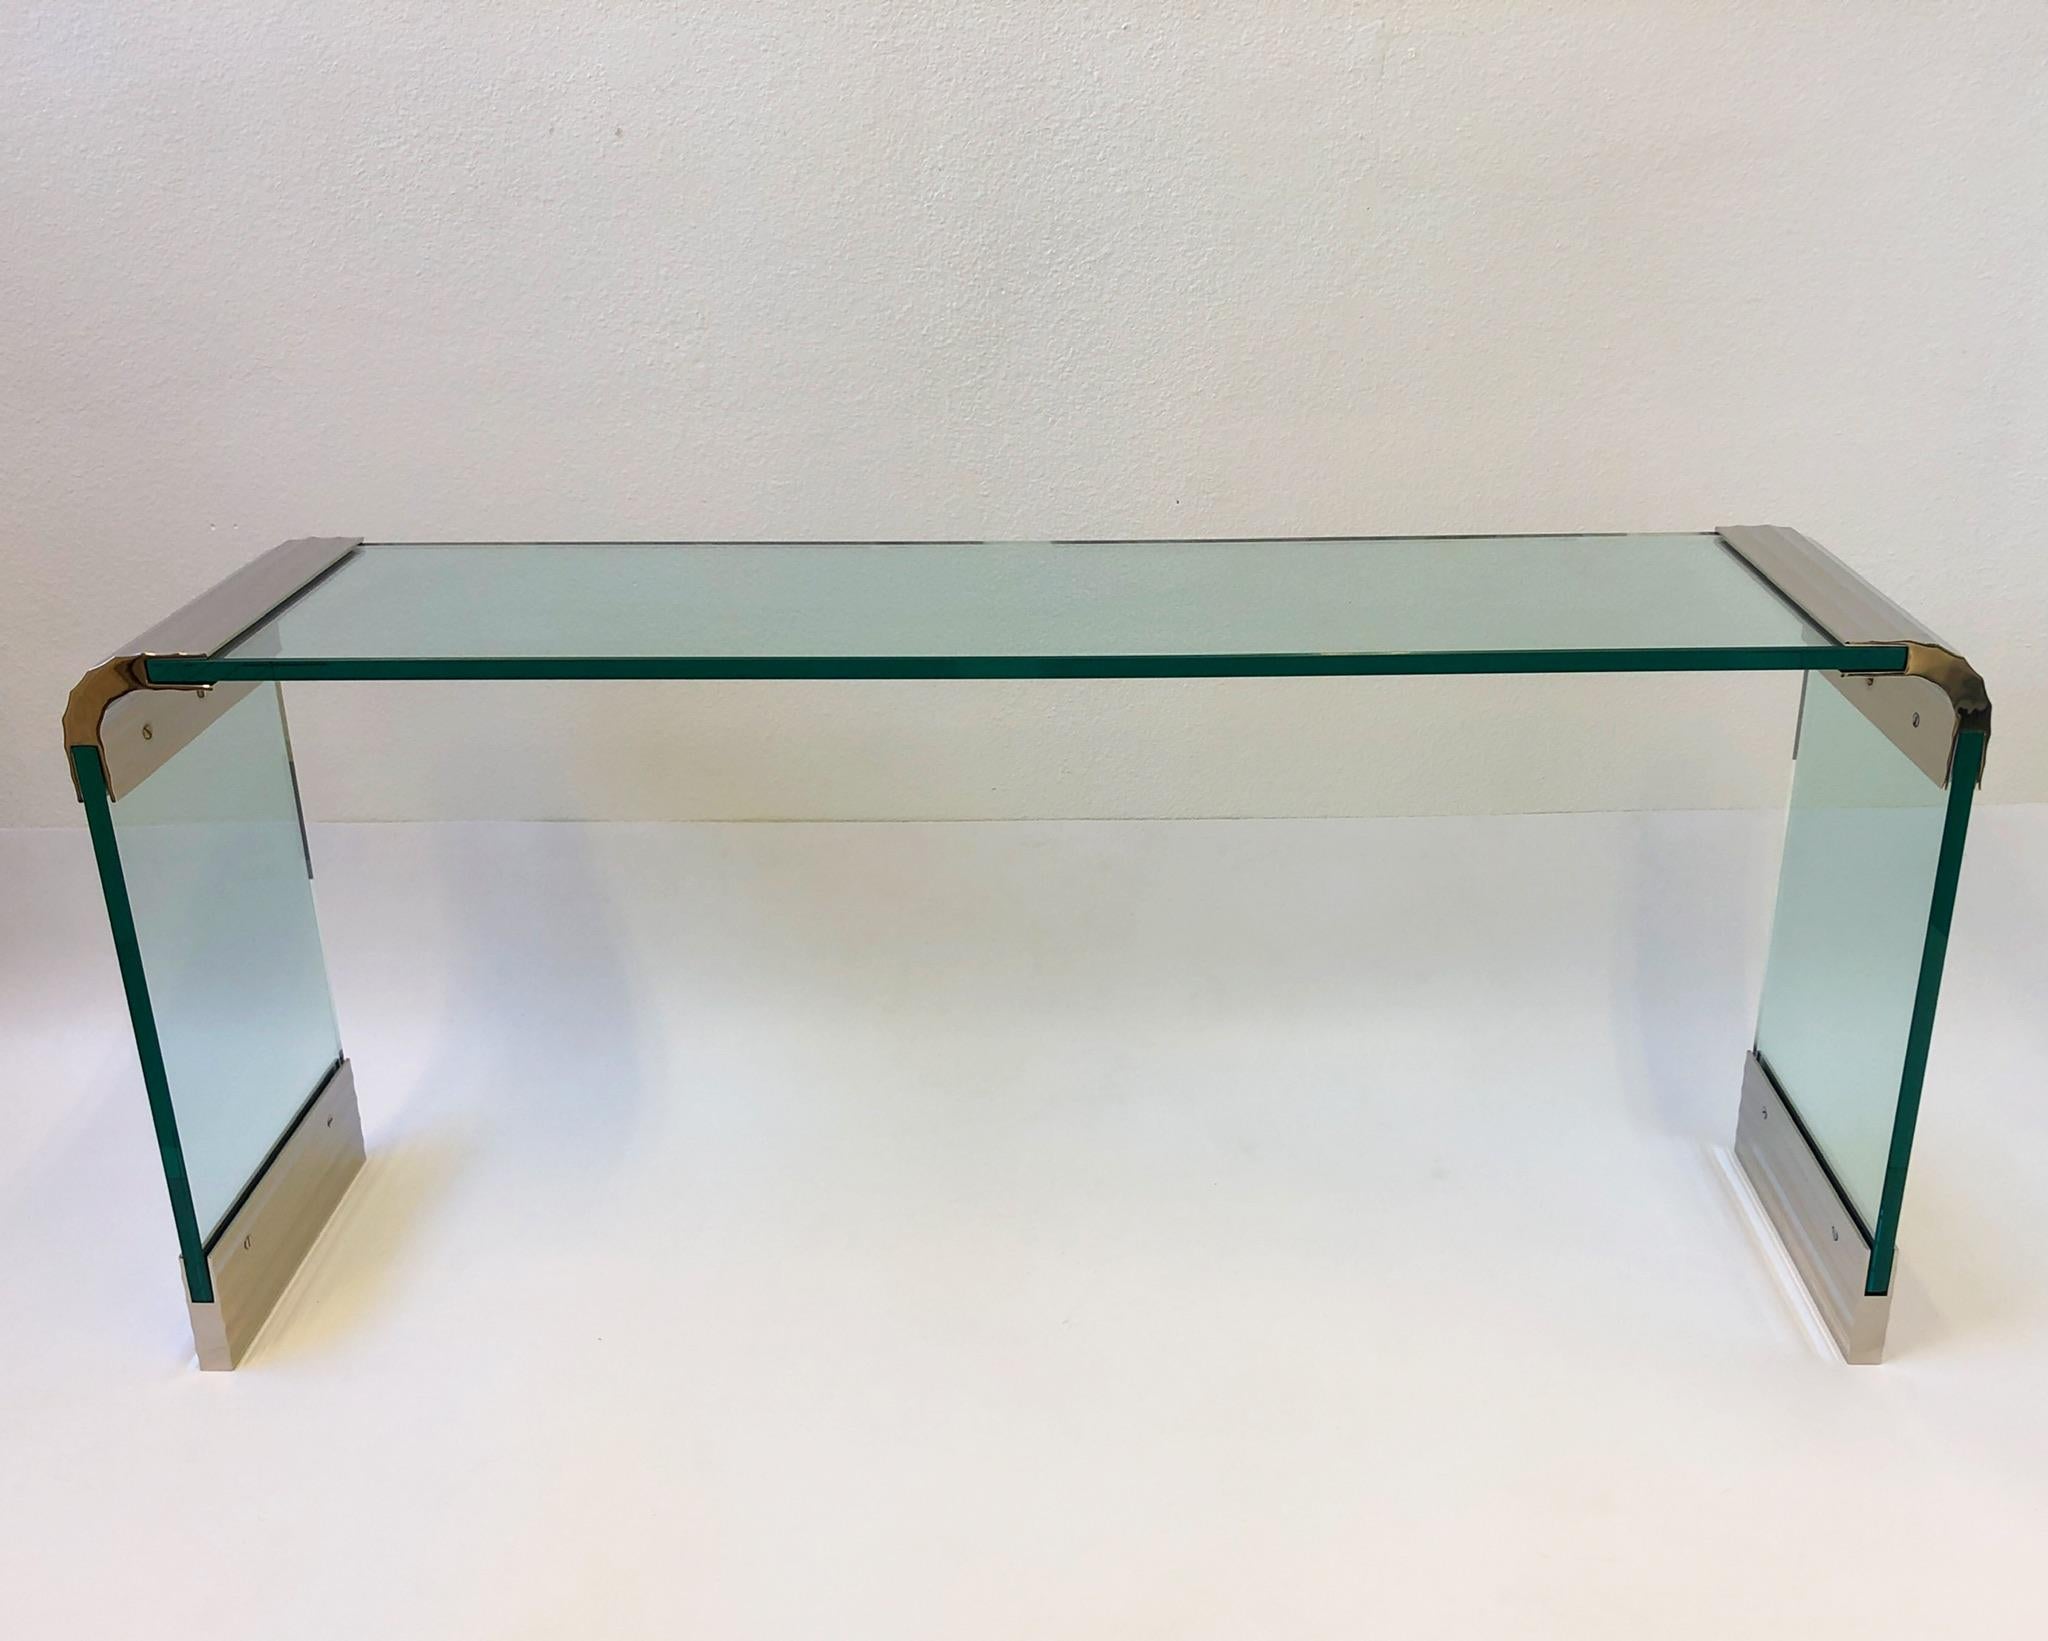 A spectacular scalloped polish nickel and glass waterfall console table designed by Leon Rosen for Pace collection in the 1970s. The table has new 3/4” thick glass and brackets have been newly nickel plated. If you want different length let us